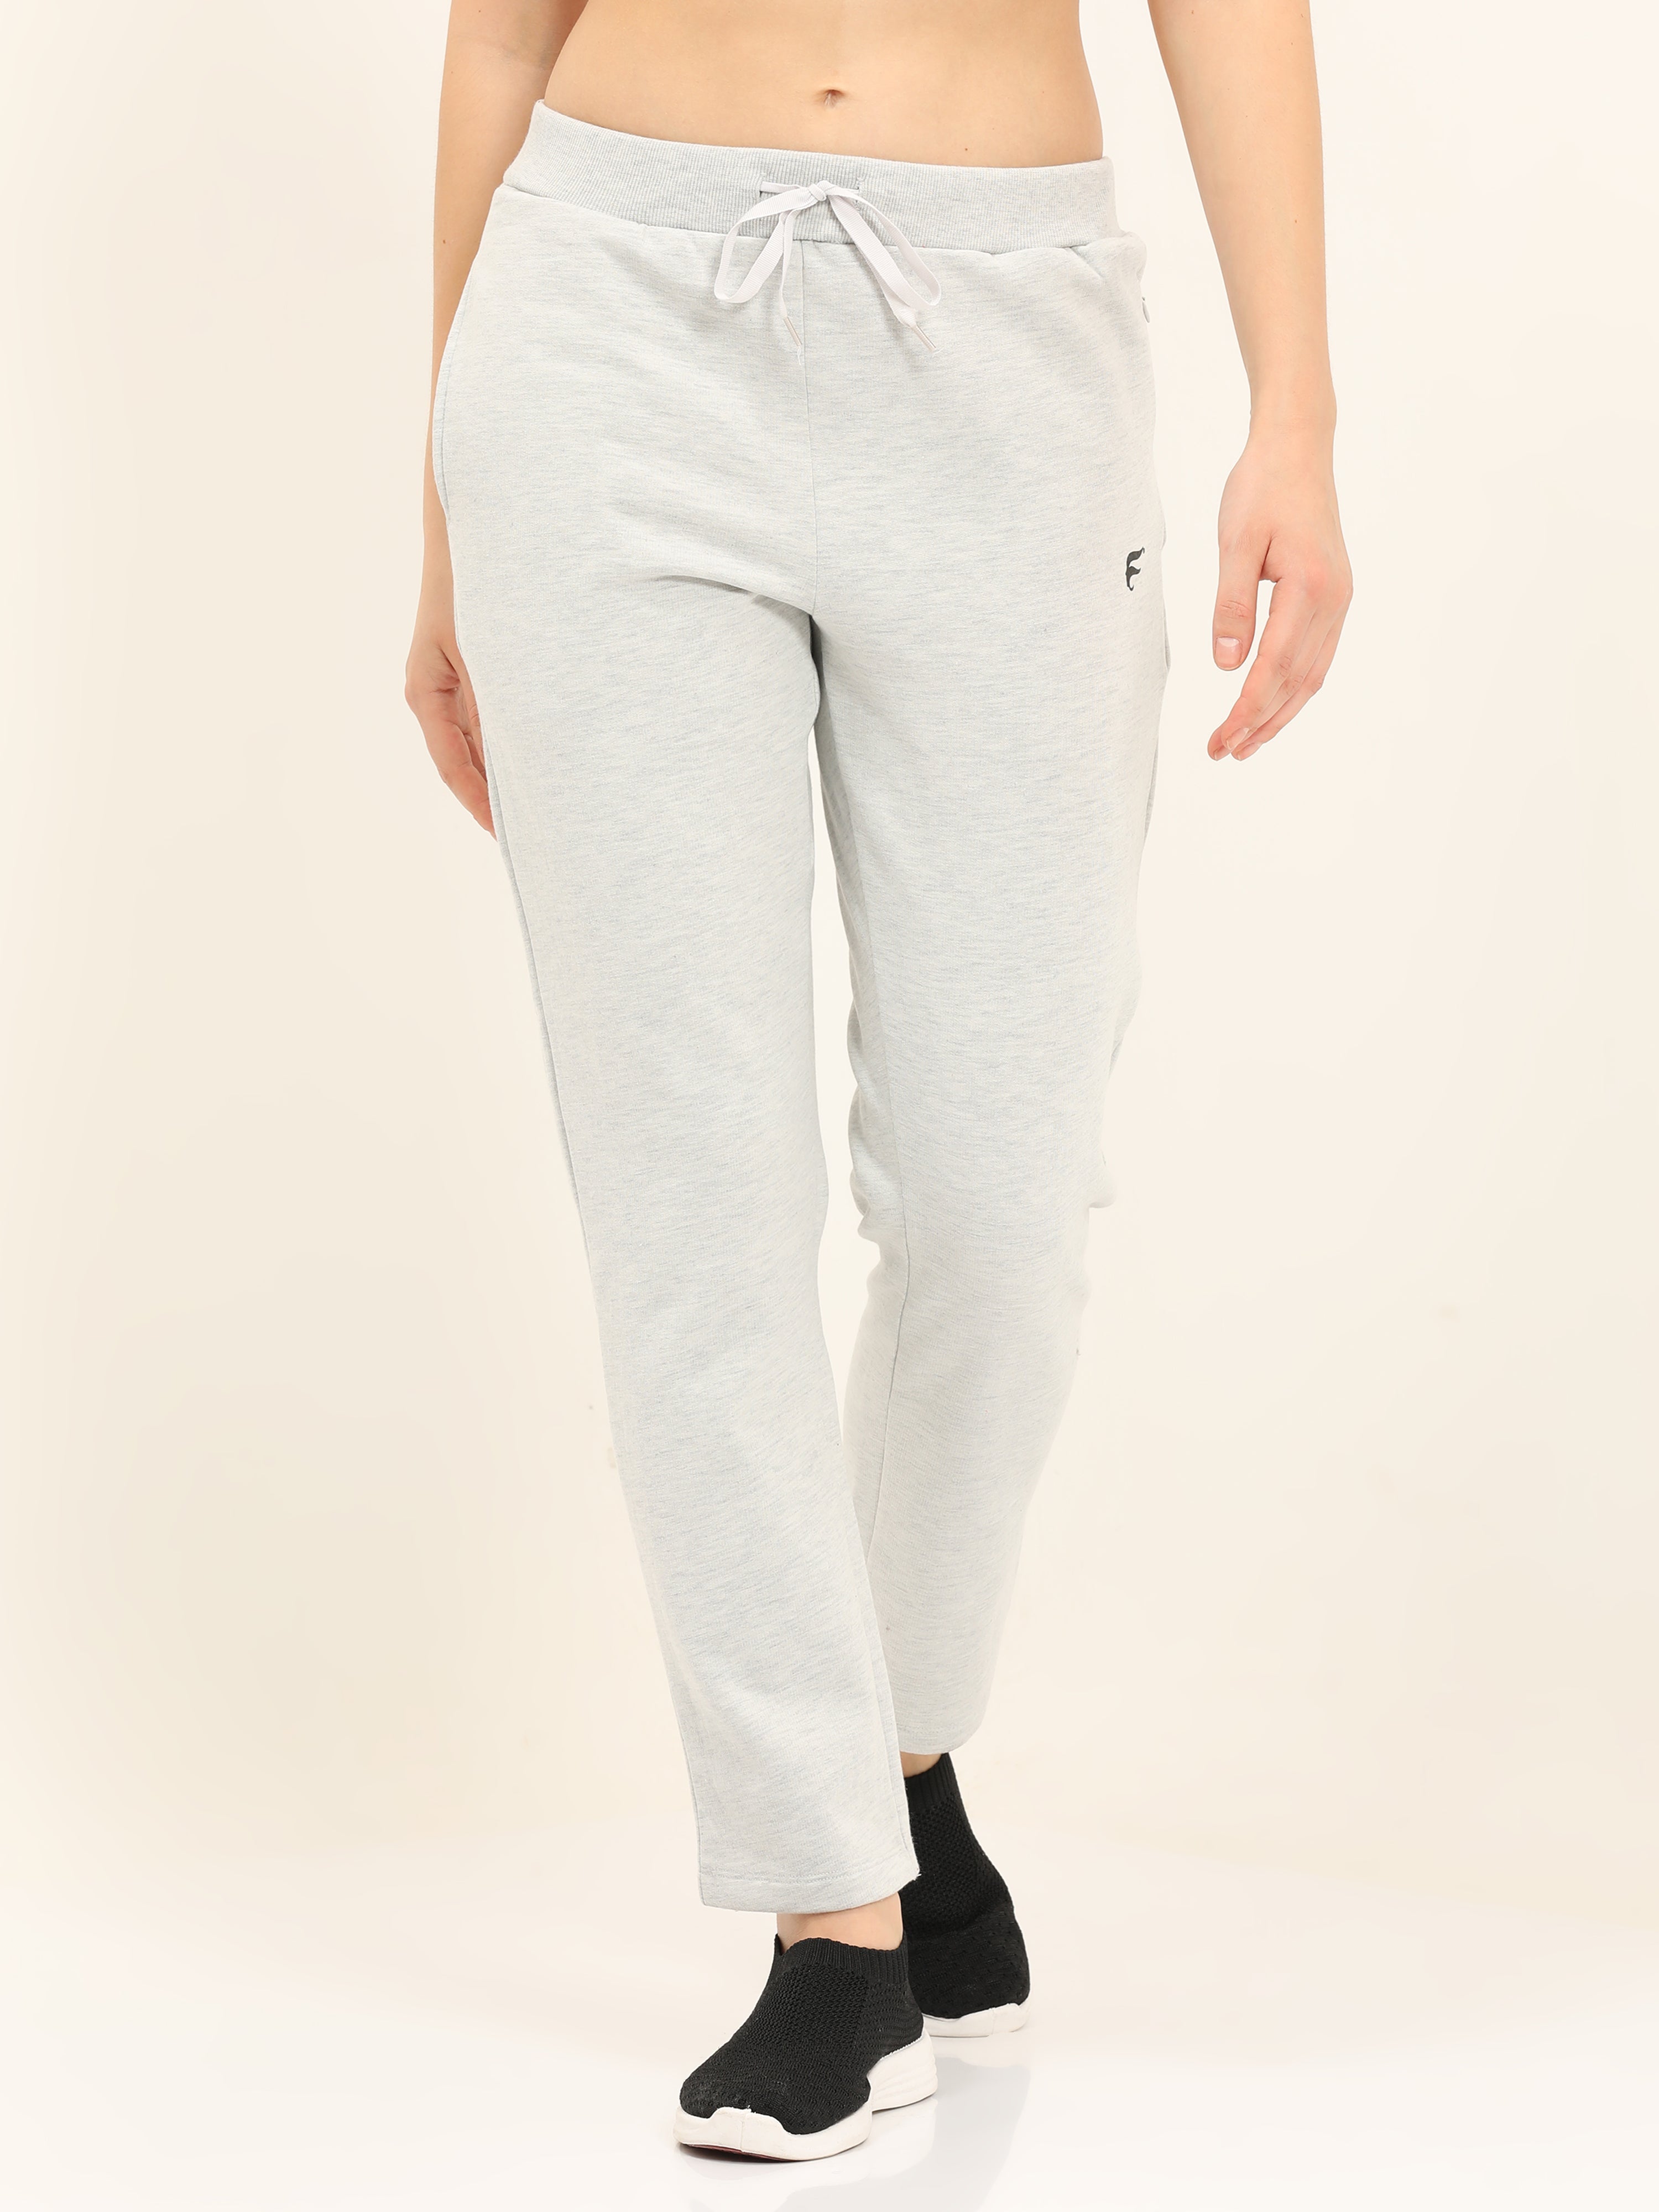 Poly Cotton Casual Sports Wear Fleece Track Pant